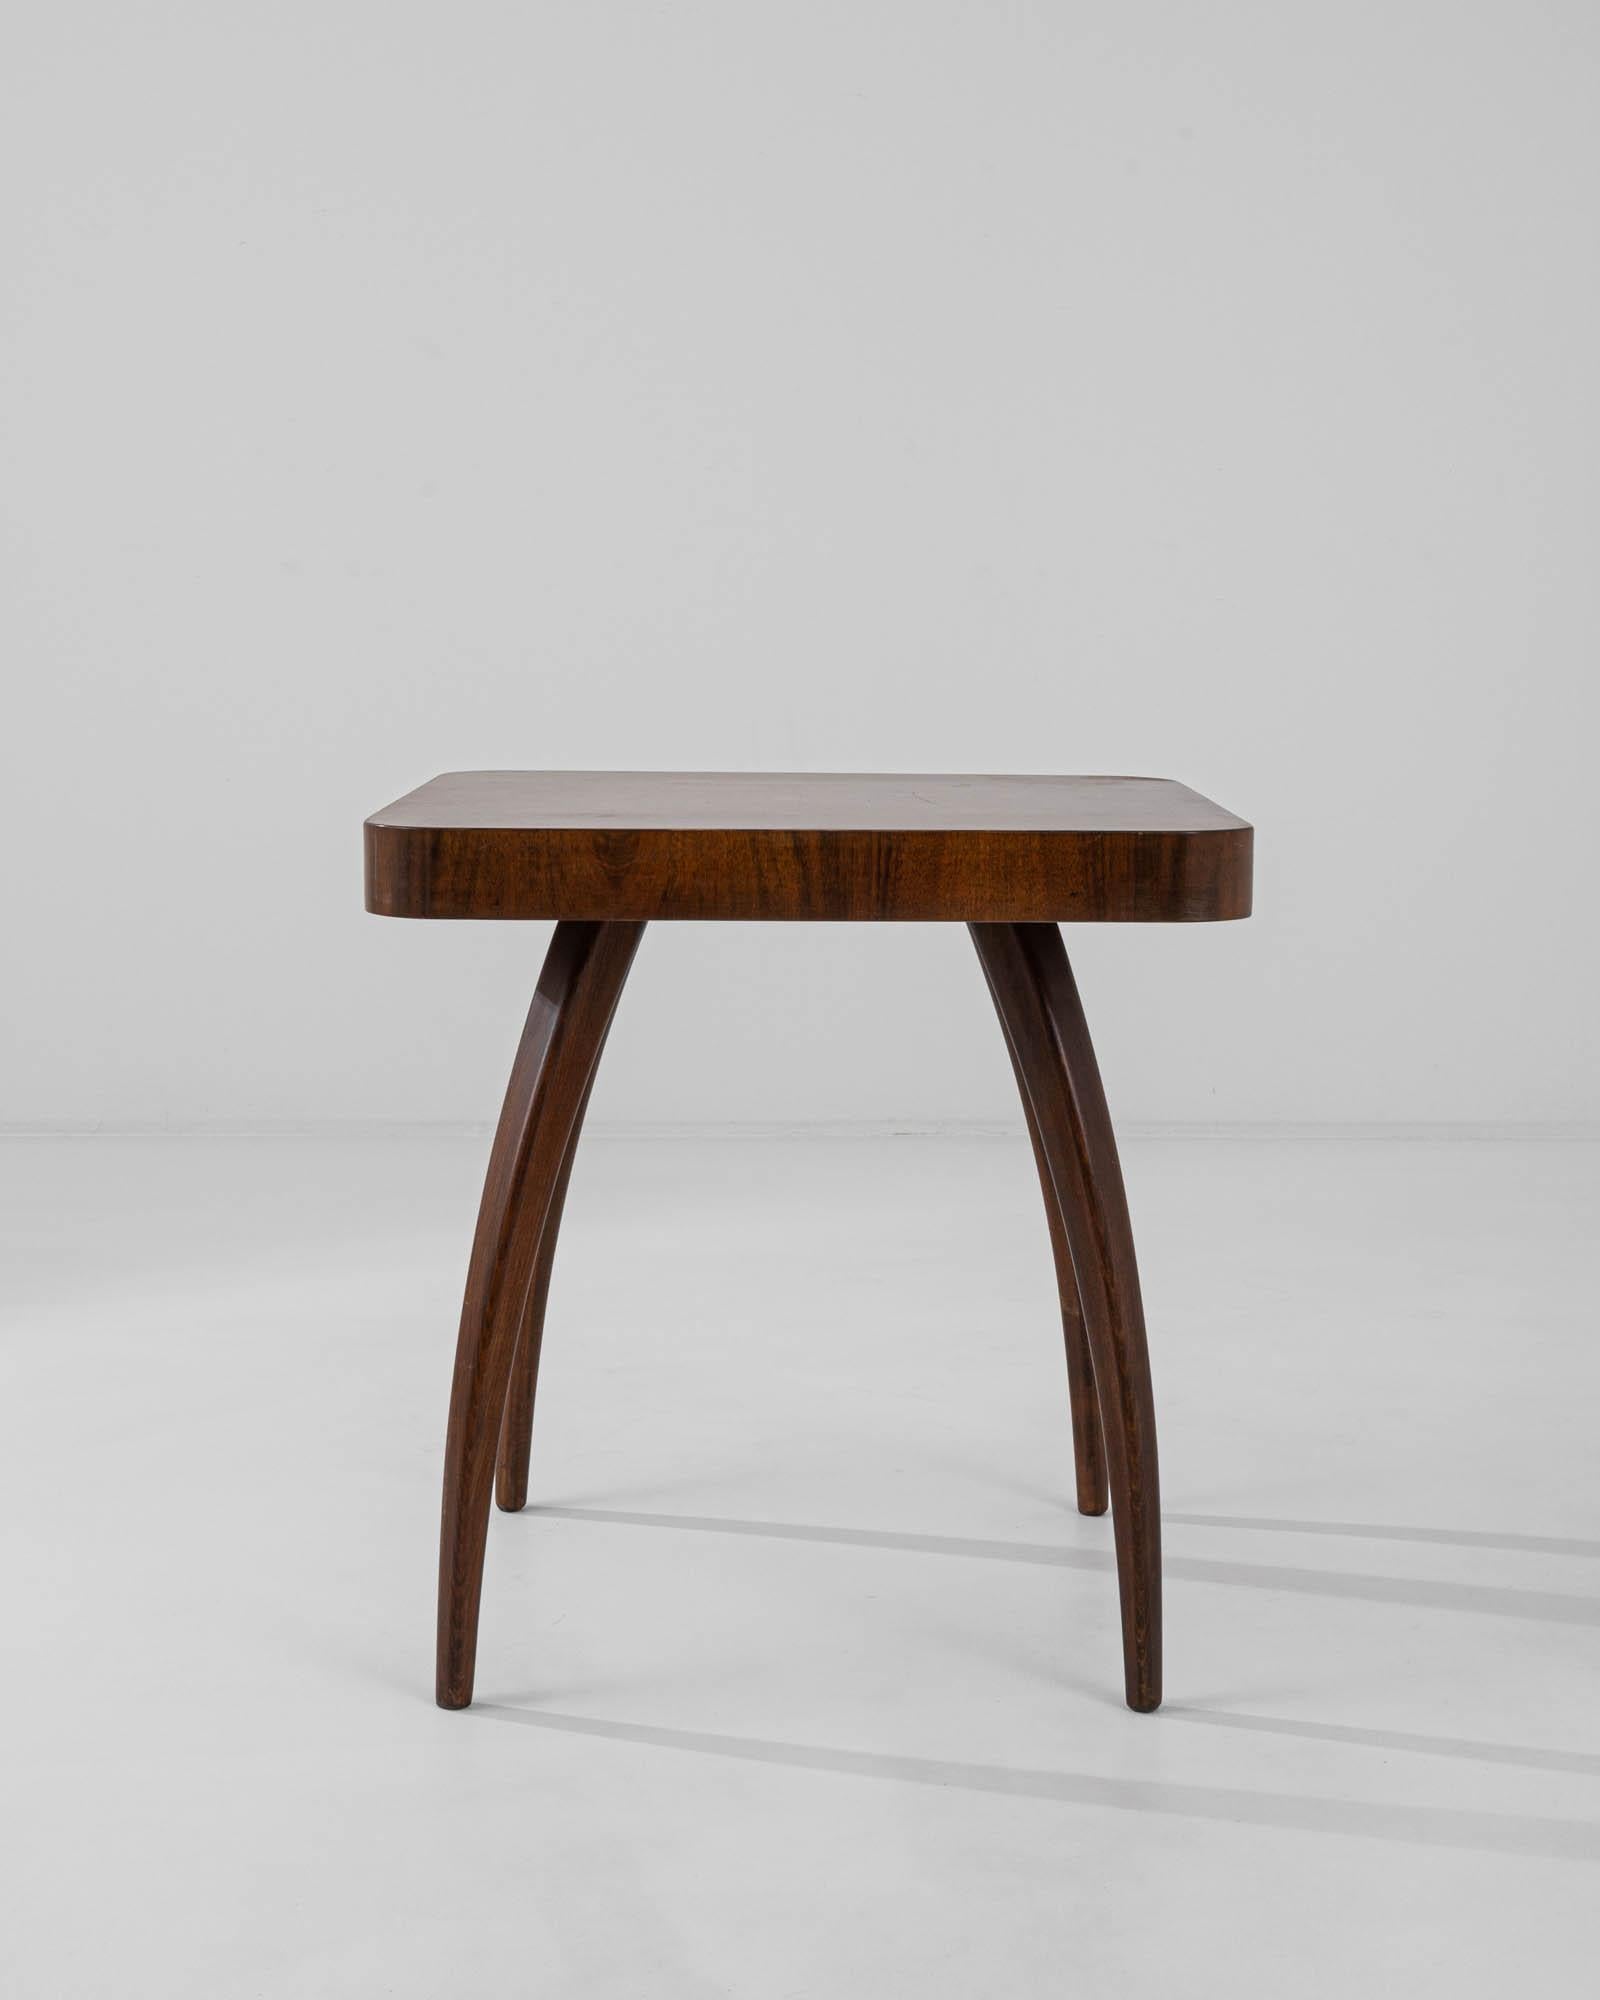 Designed by Jindrich Halabala, this iconic side table was produced in the former Czechoslovakia, circa 1930-50. Known as the ‘spider table,’ the H259 owes its name to the playful curve of bentwood beech legs. A decorative wood veneer is composed